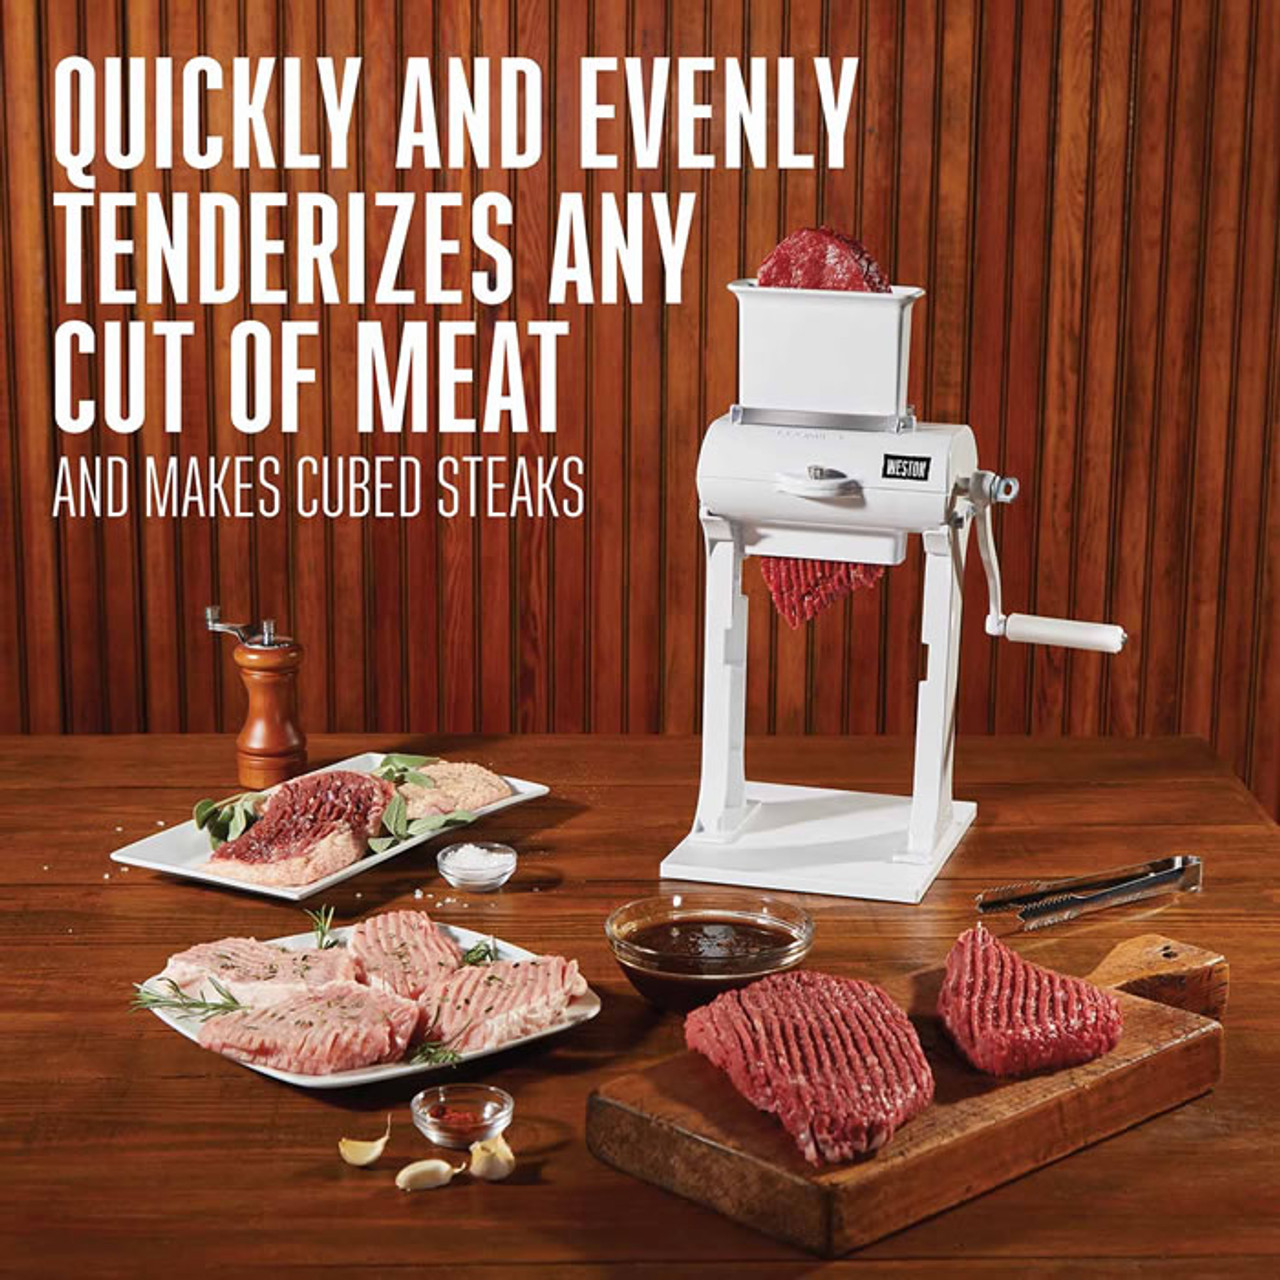 Meat Grinder with Tabletop Clamp & 2 Cutting Disks, Cast Iron Heavy Duty  Sausage Maker and Manual Meat Mincer - Make Homemade Burger Patties, Ground